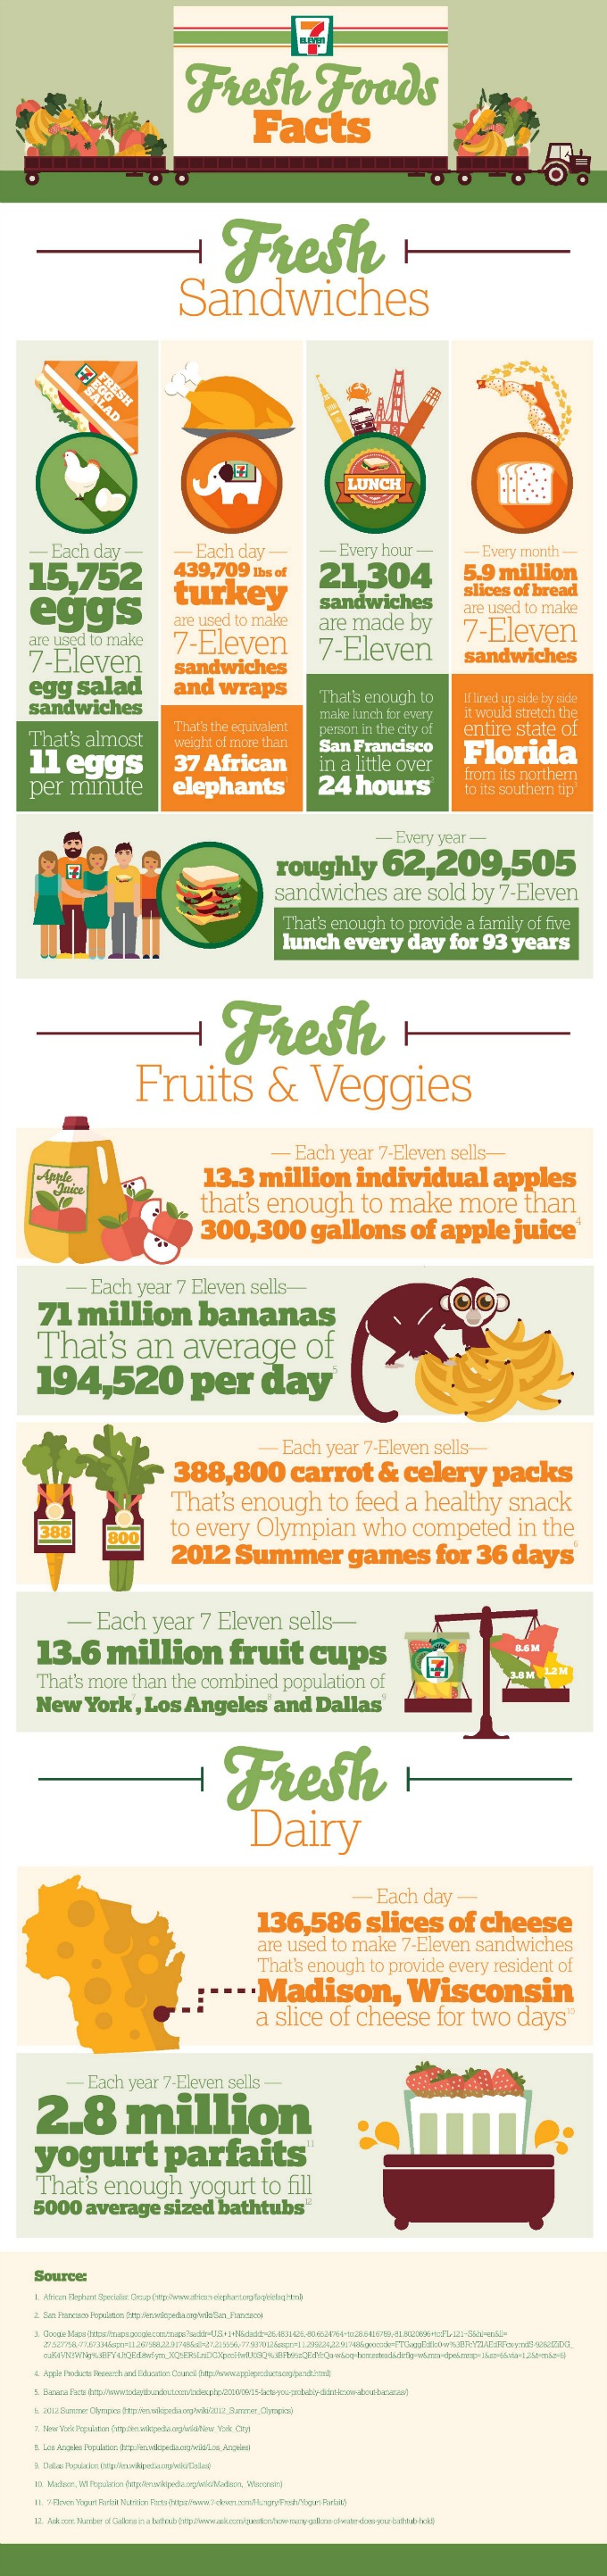 7-Eleven-Fresh-Foods-to-Go-Infographic